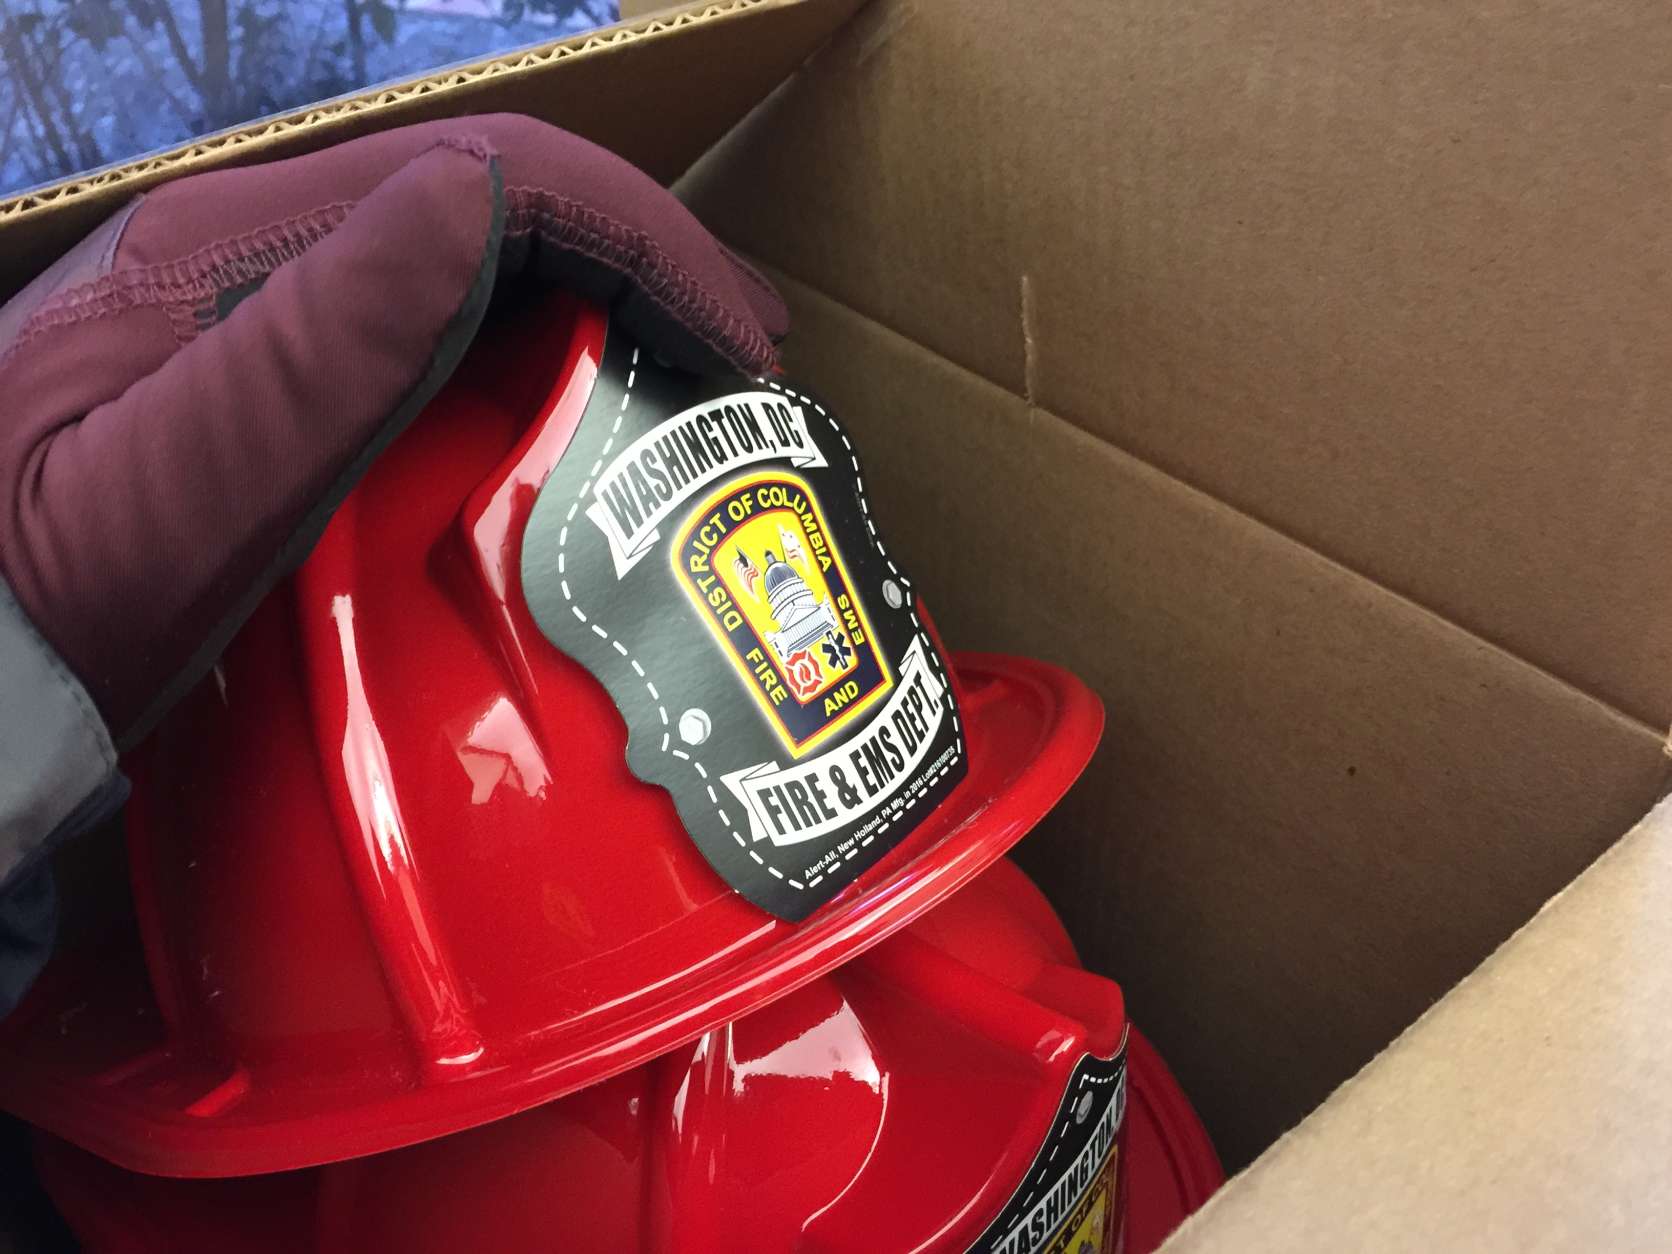 Plastic firefighter helmets are given away to kids. "We go to a variety of community events," said D.C. Fire spokesman Vito Maggiolo. "That's one way to attract the children to us, and then we can talk to them about fire safety." (WTOP/Kristi King)